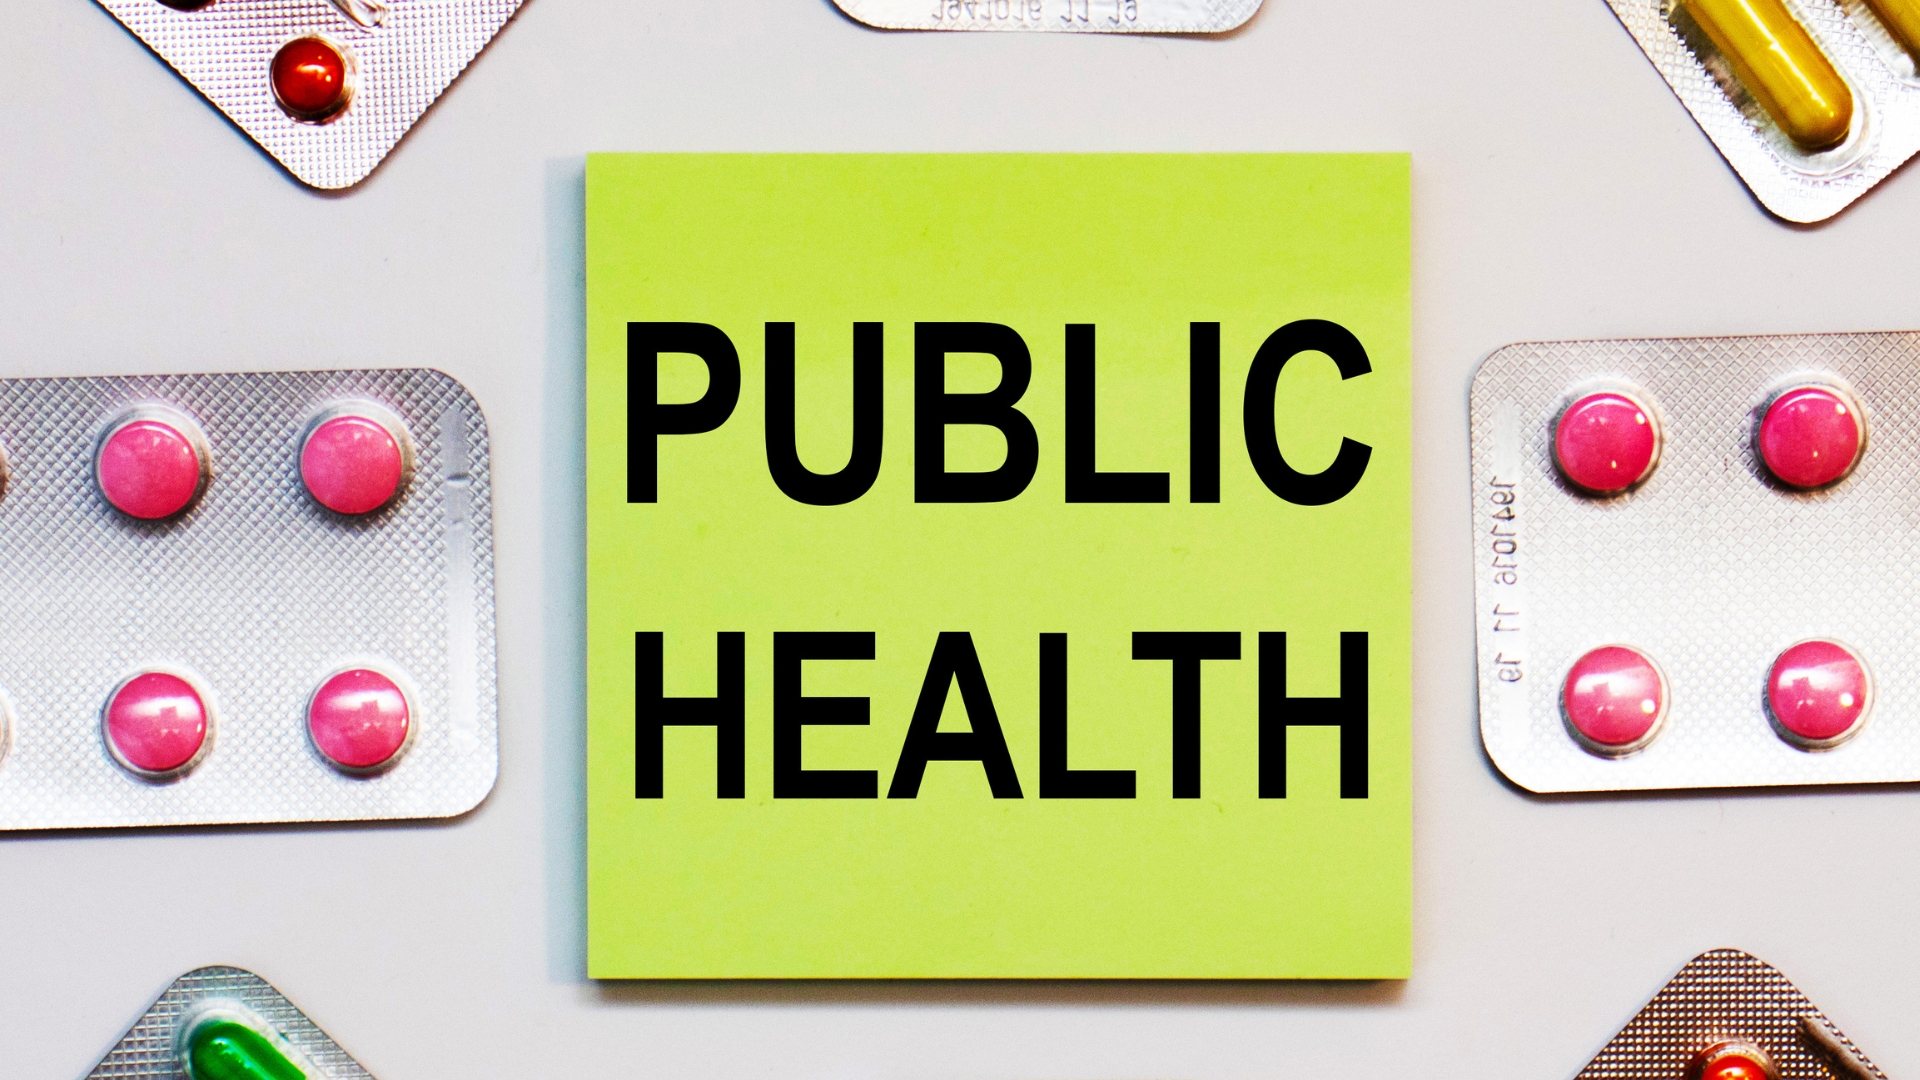 Online Bachelor's in Public Health - featured image